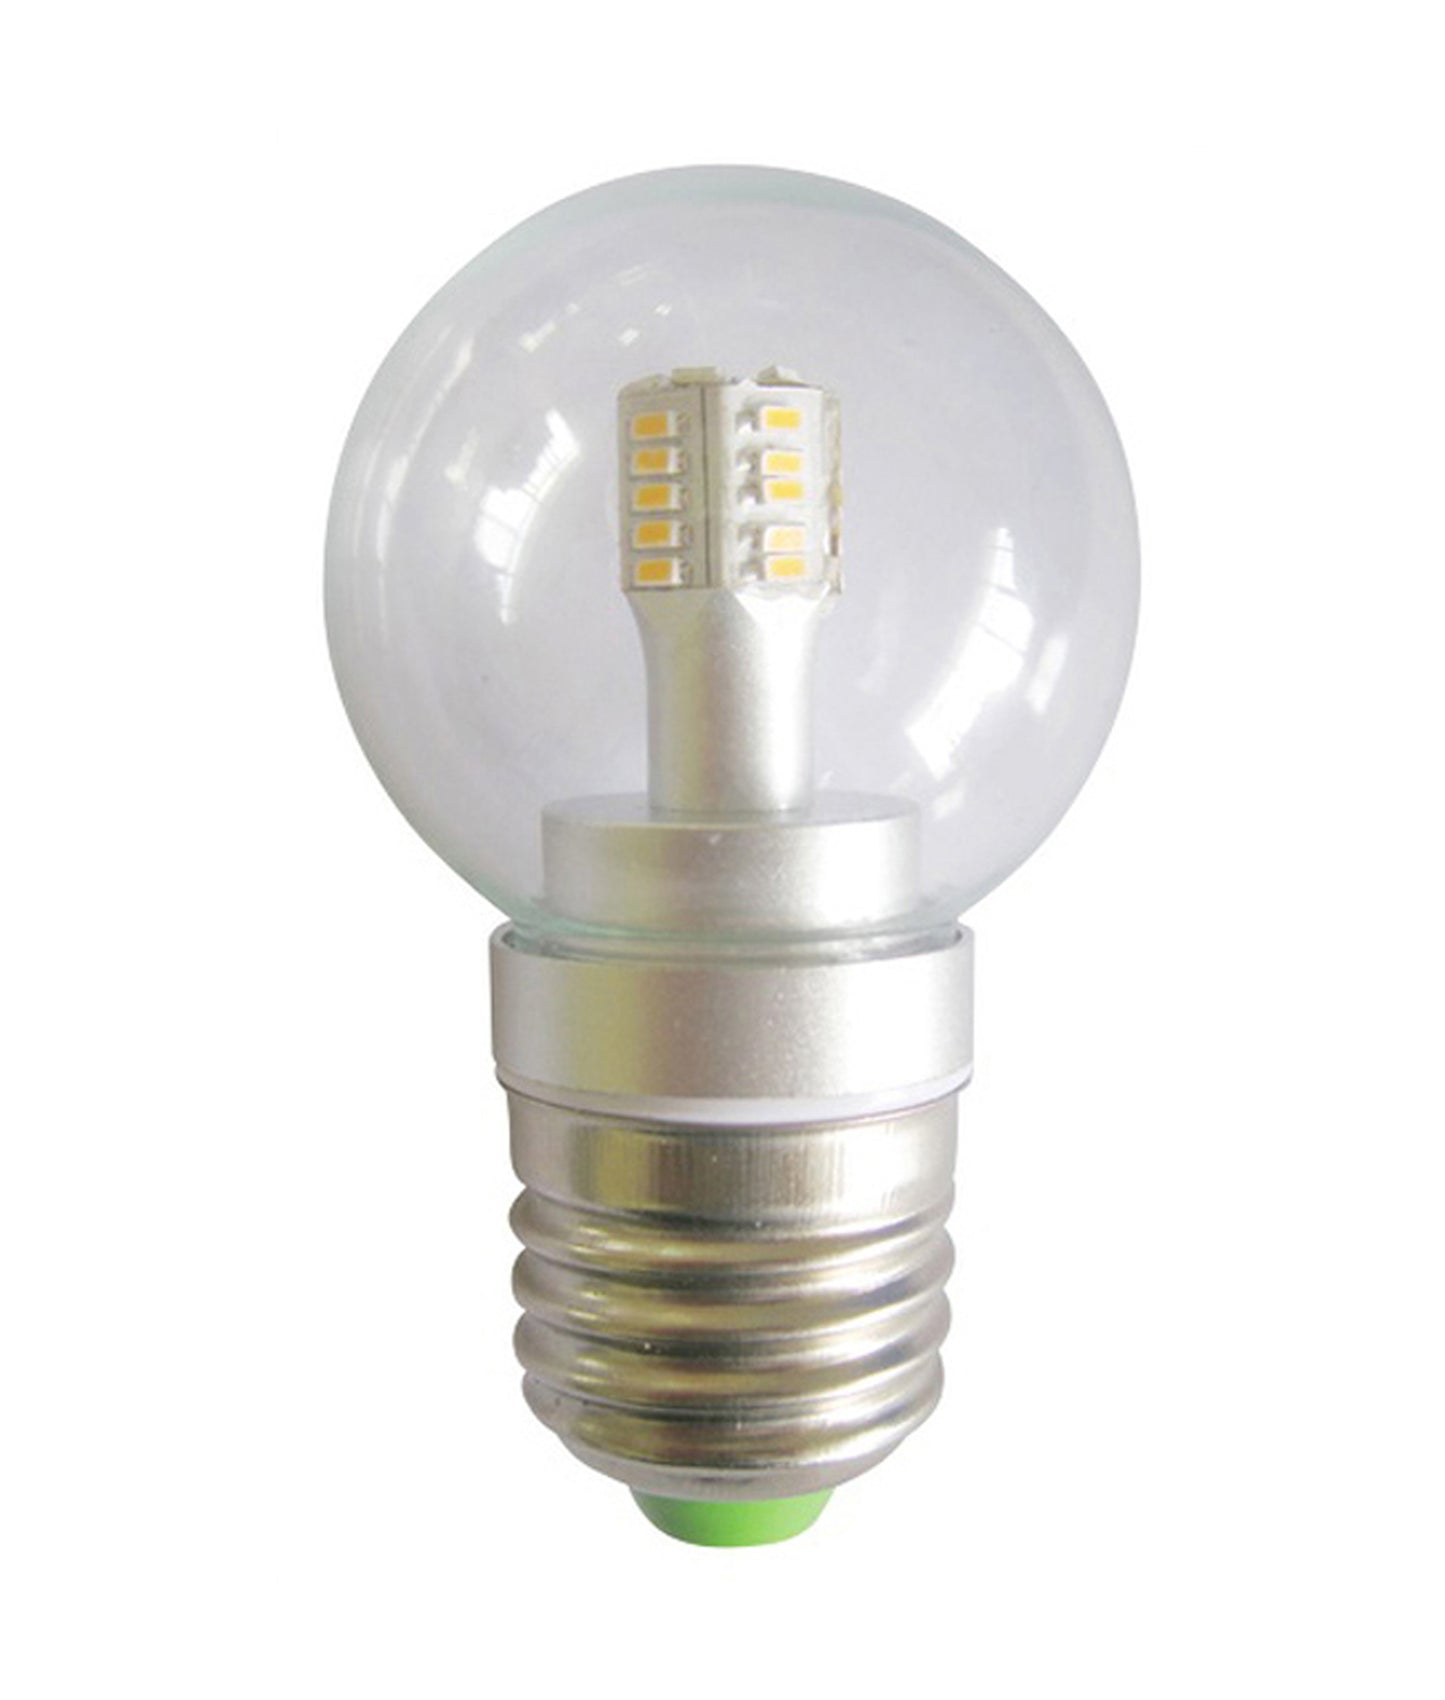 Fancy Round LED Globes Clear / Frosted Diffuser (4W)